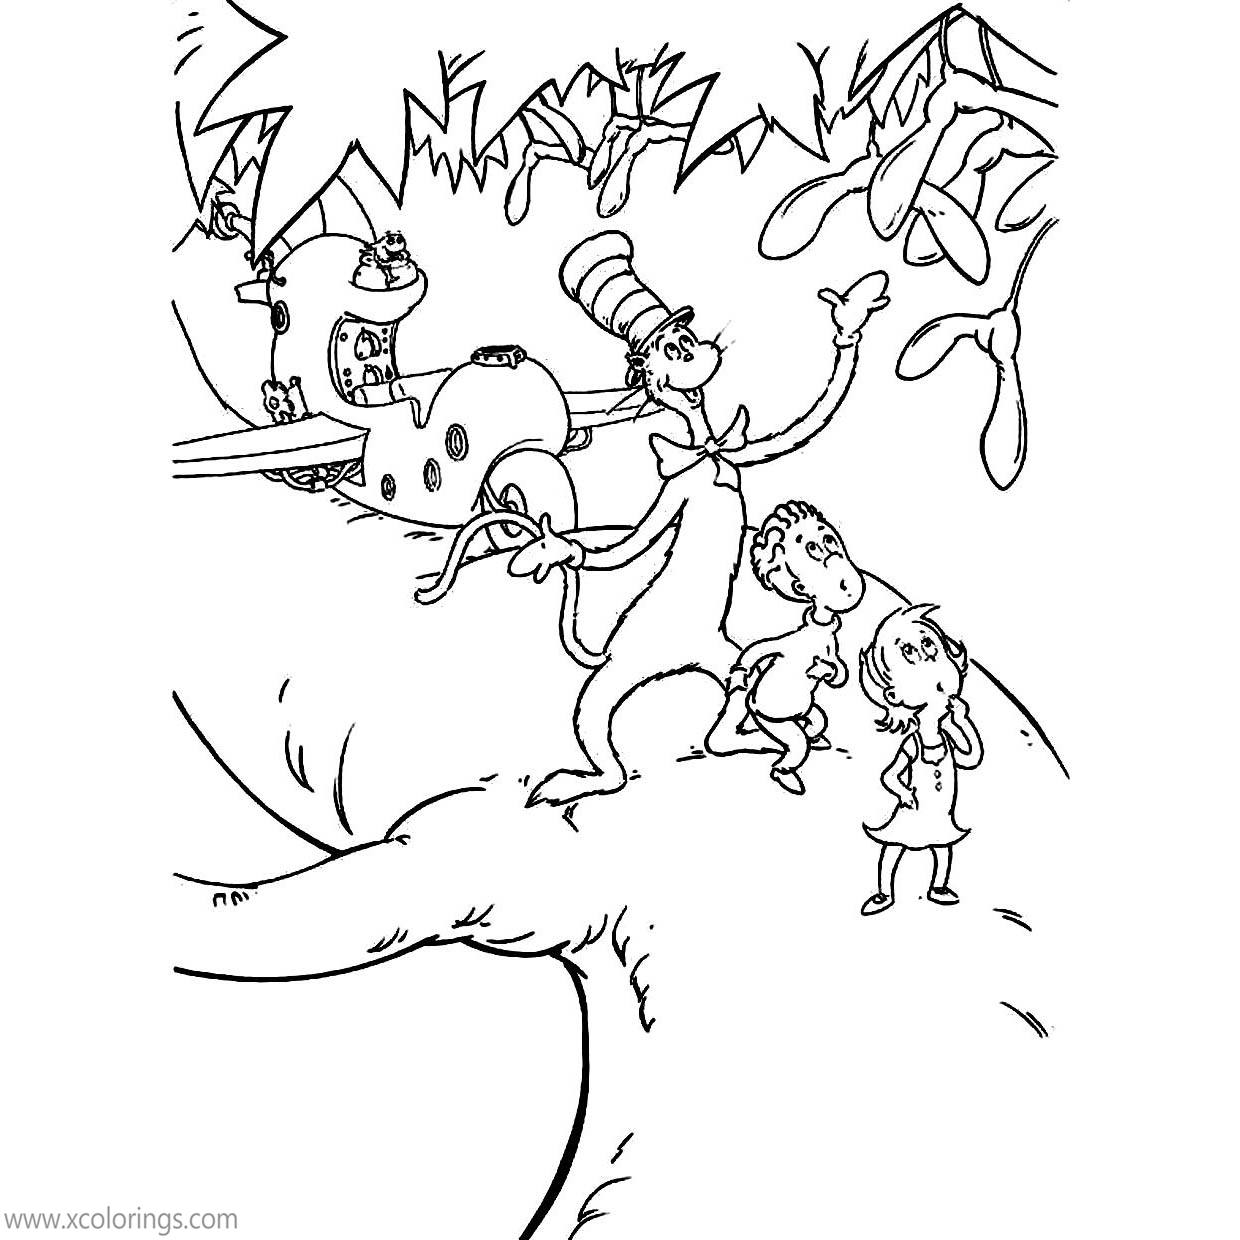 Free Cat In The Hat Coloring Pages Landed on the Tree printable